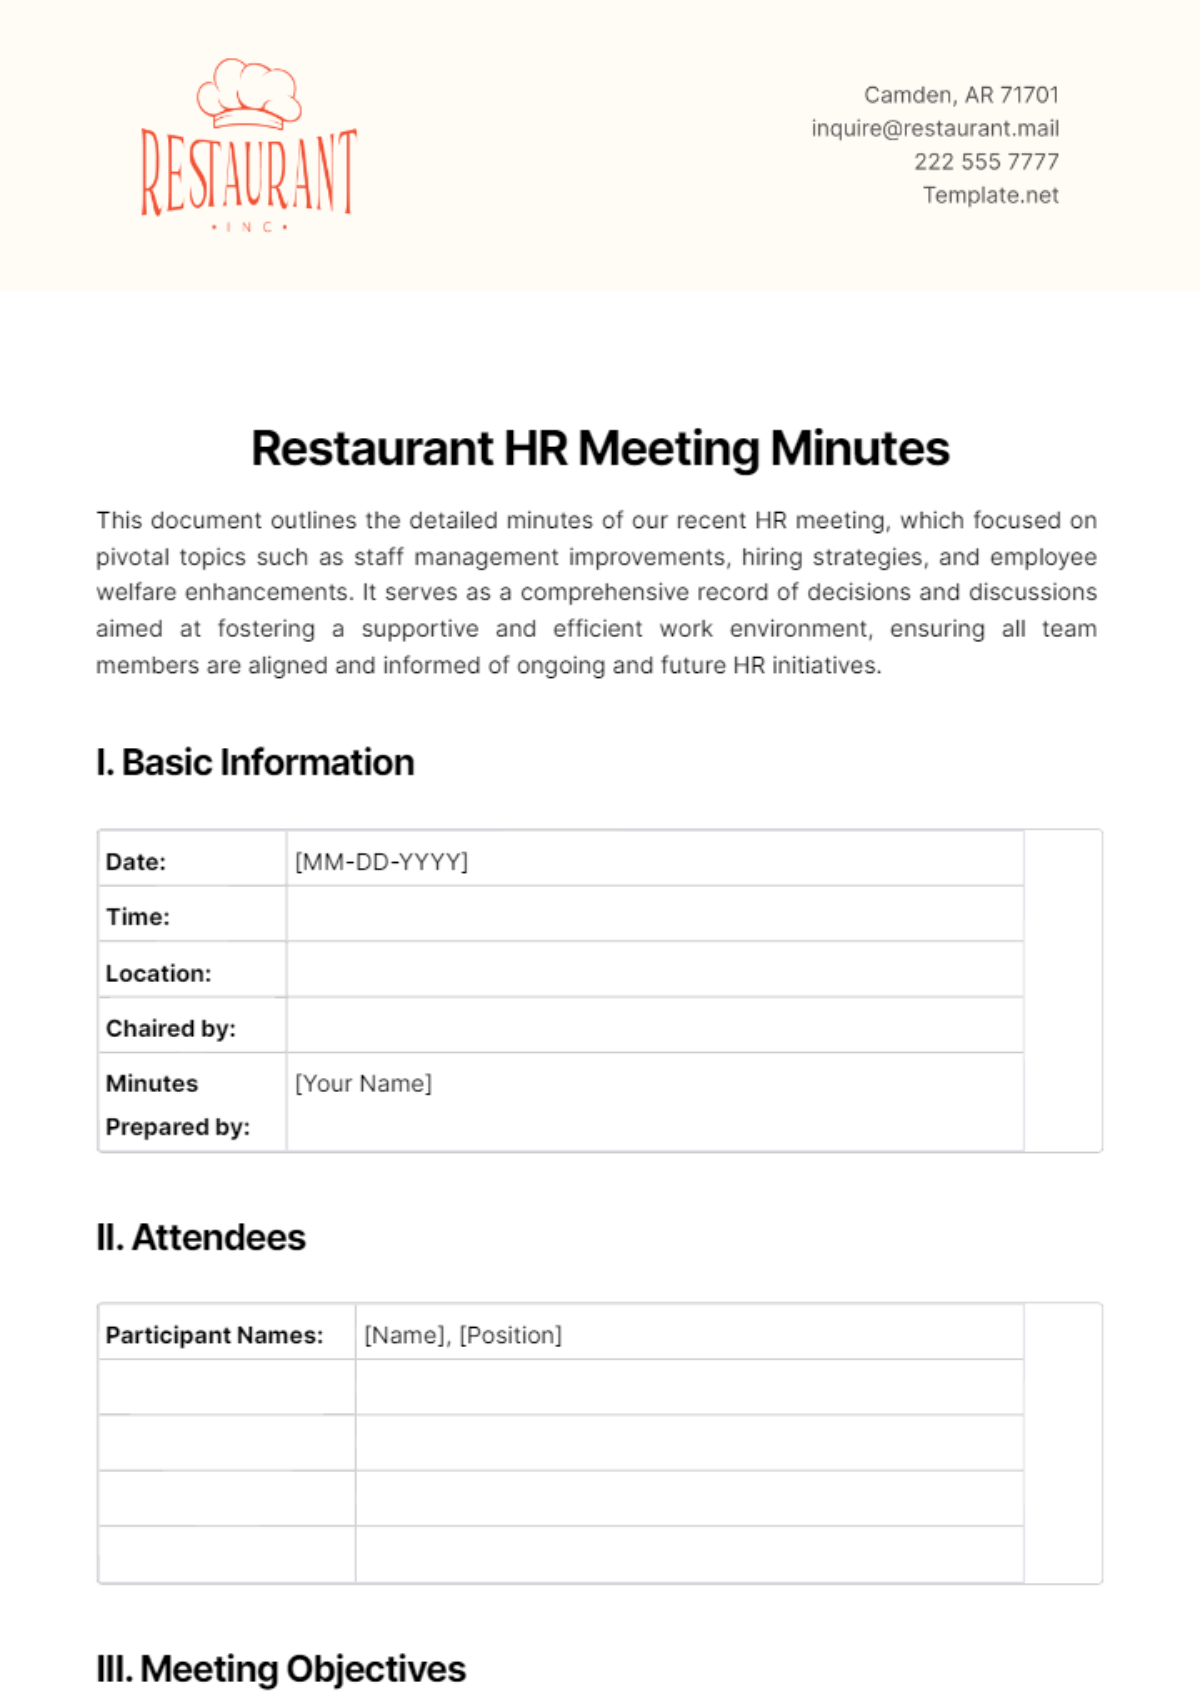 Free Restaurant HR Meeting Minutes Template